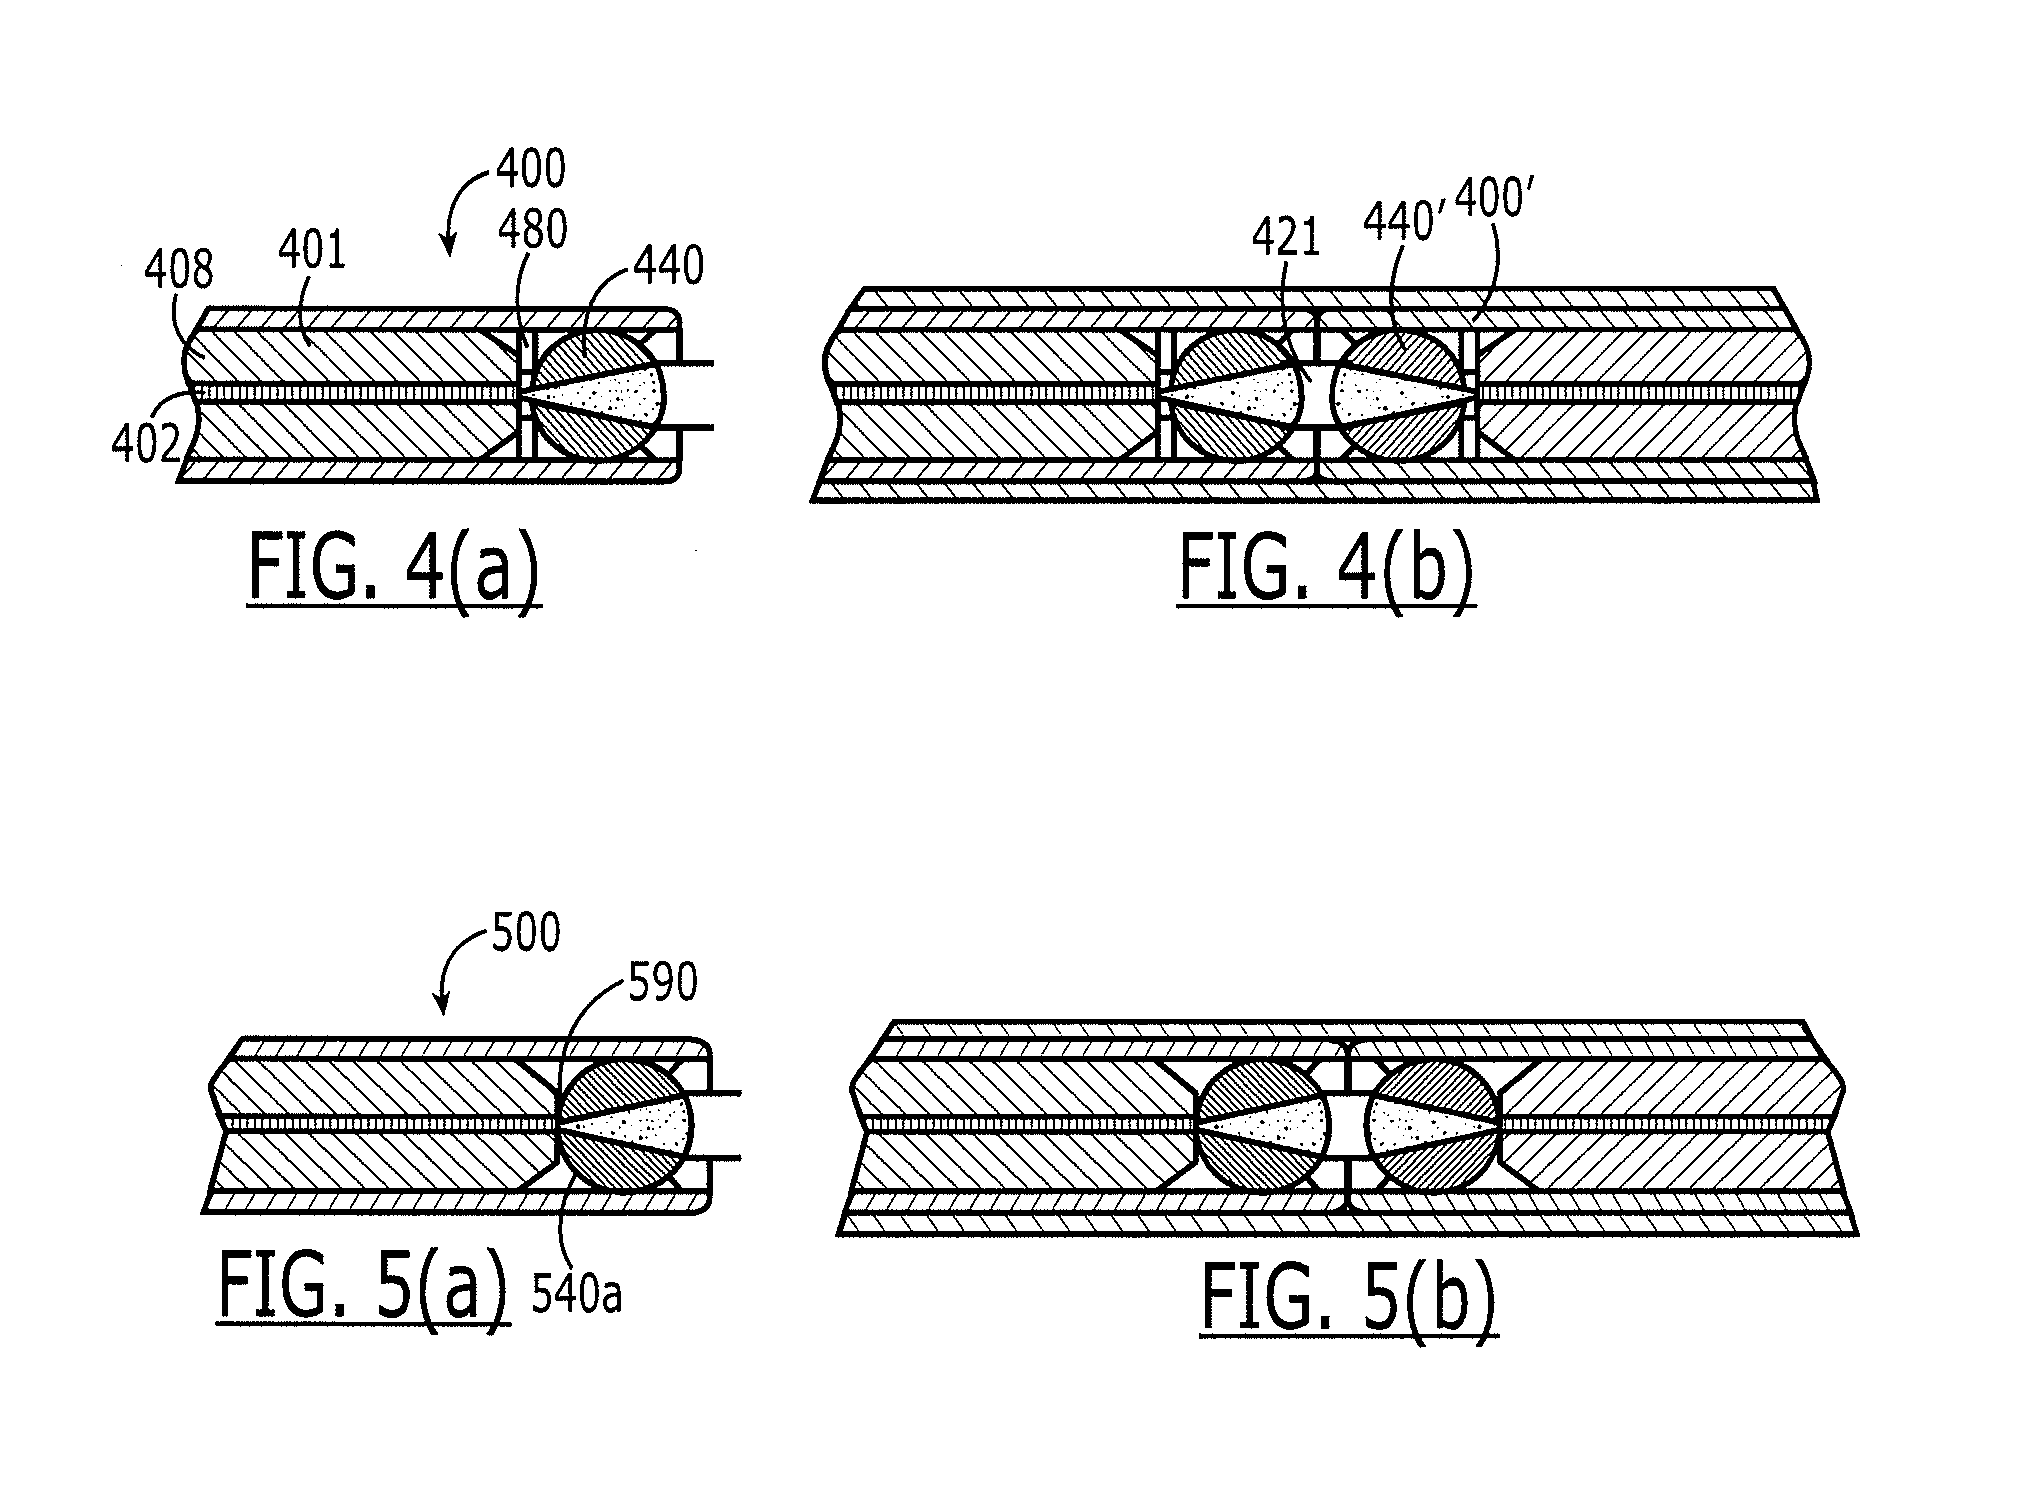 Expanded-beam connector with molded lens